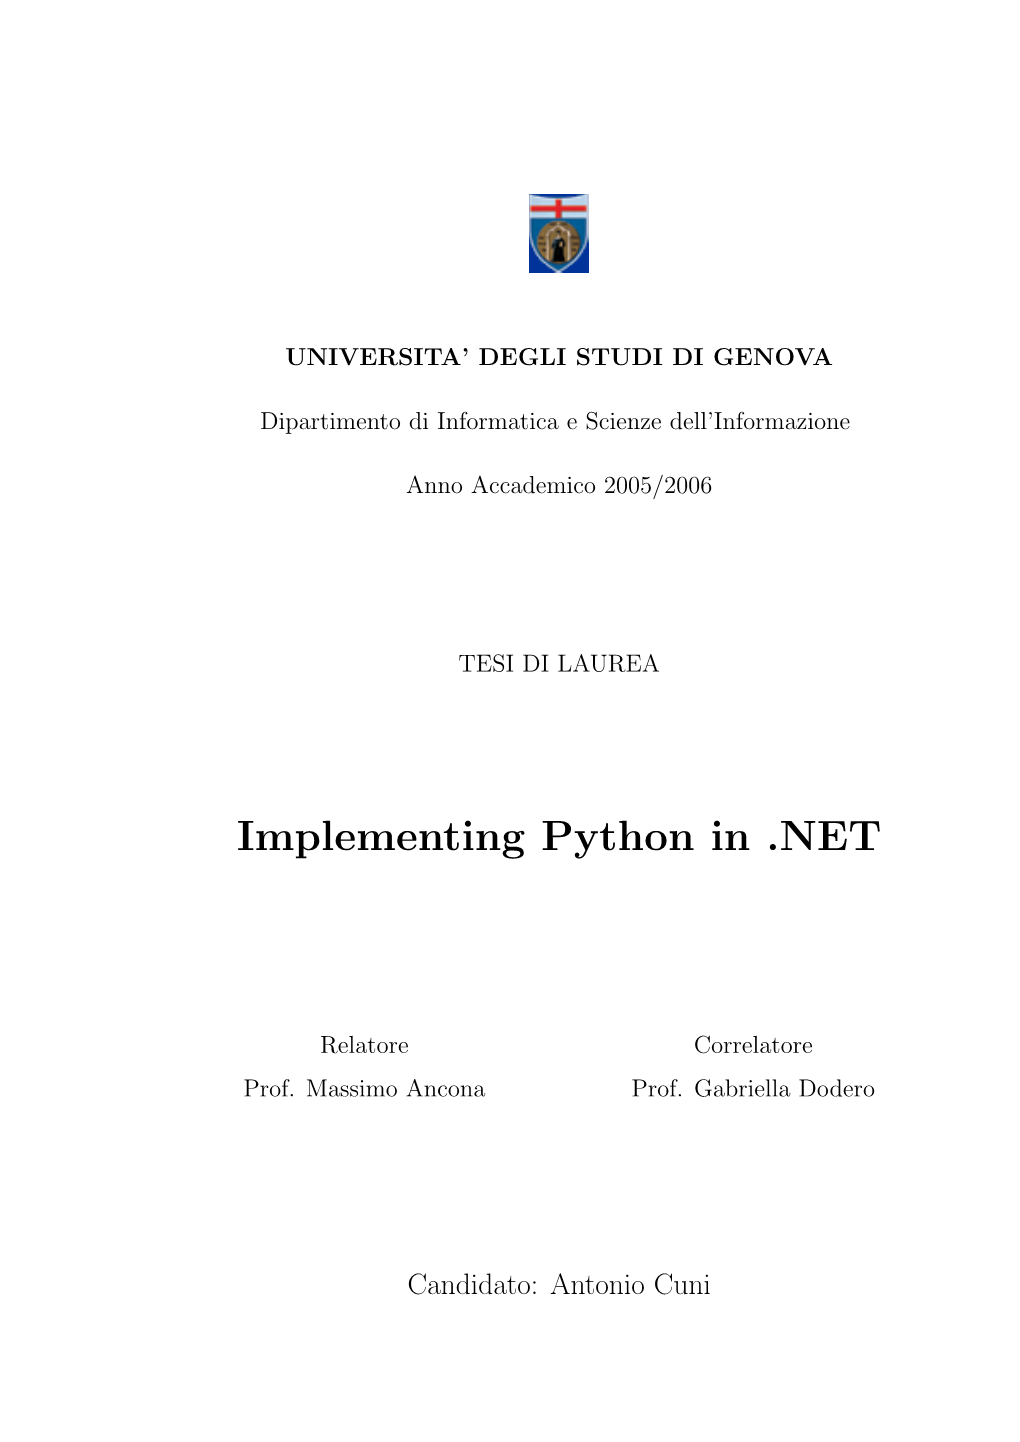 Implementing Python in .NET